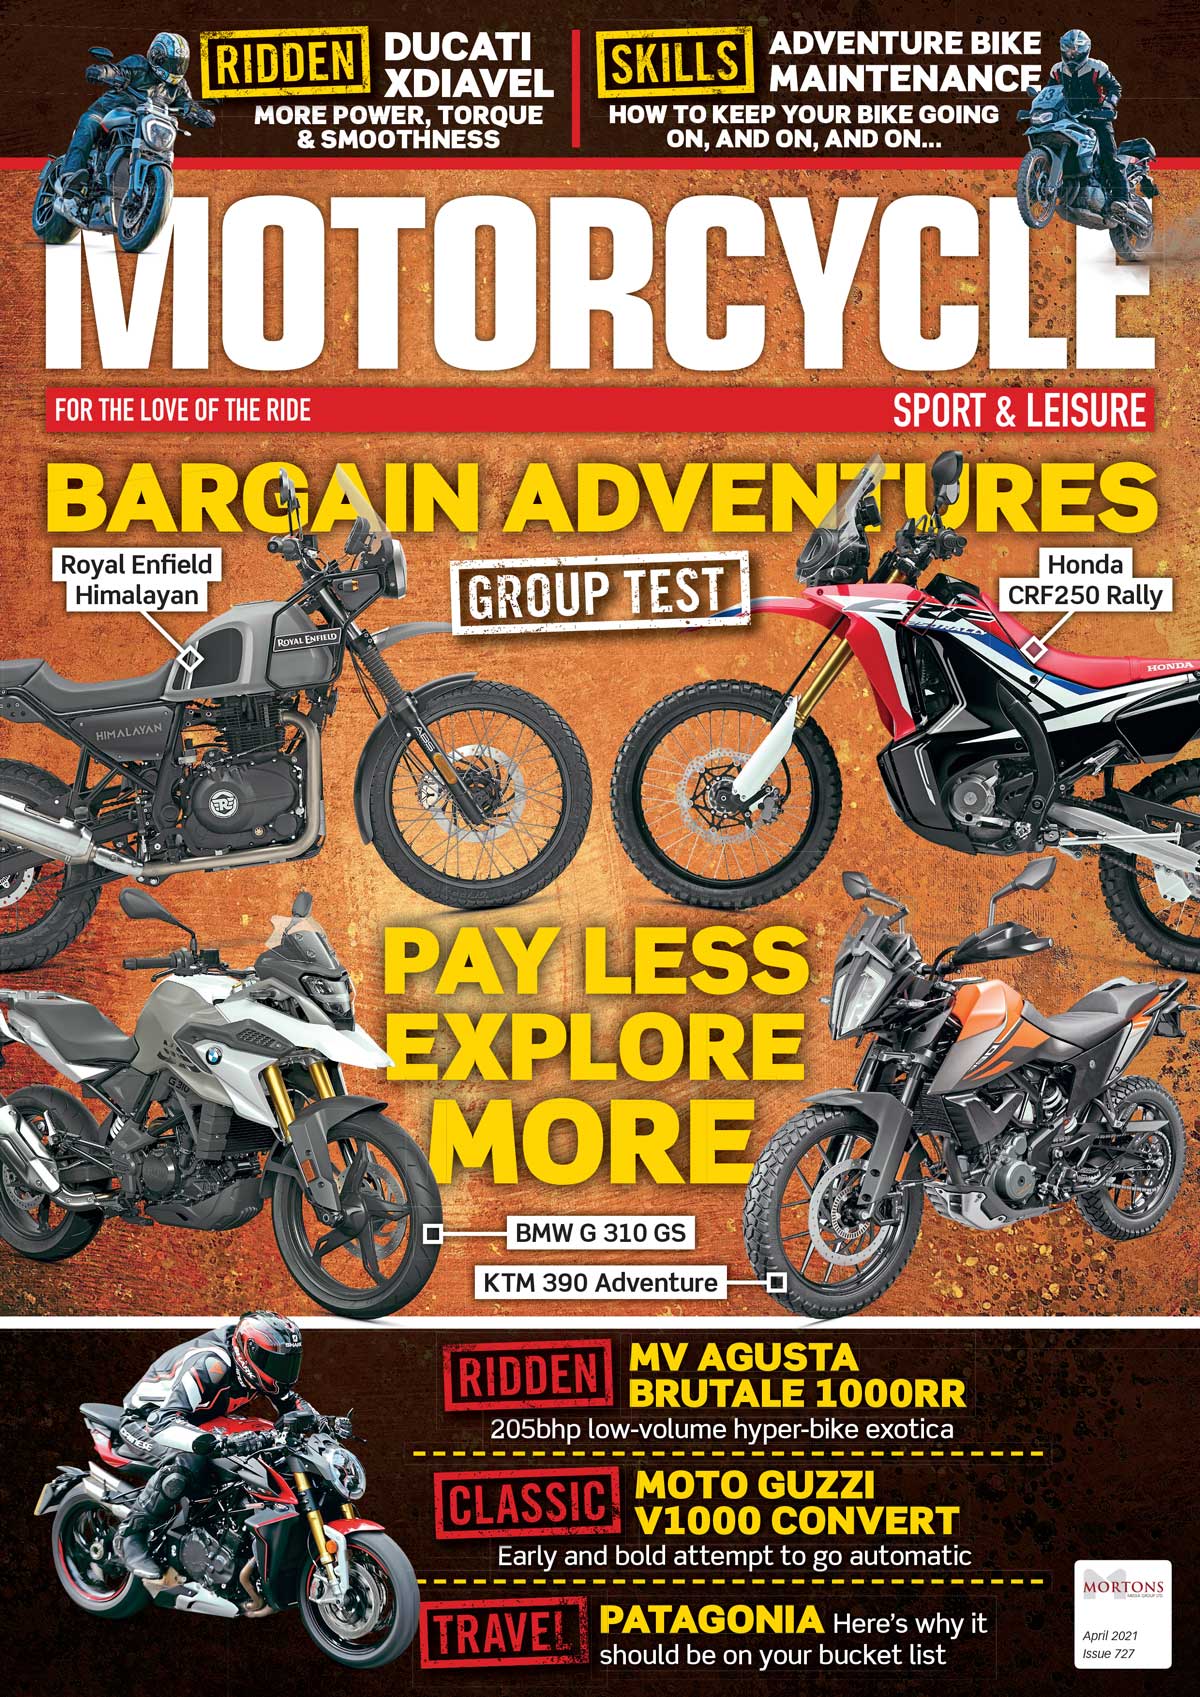 PREVIEW: April issue of Motorcycle Sport & Leisure magazine